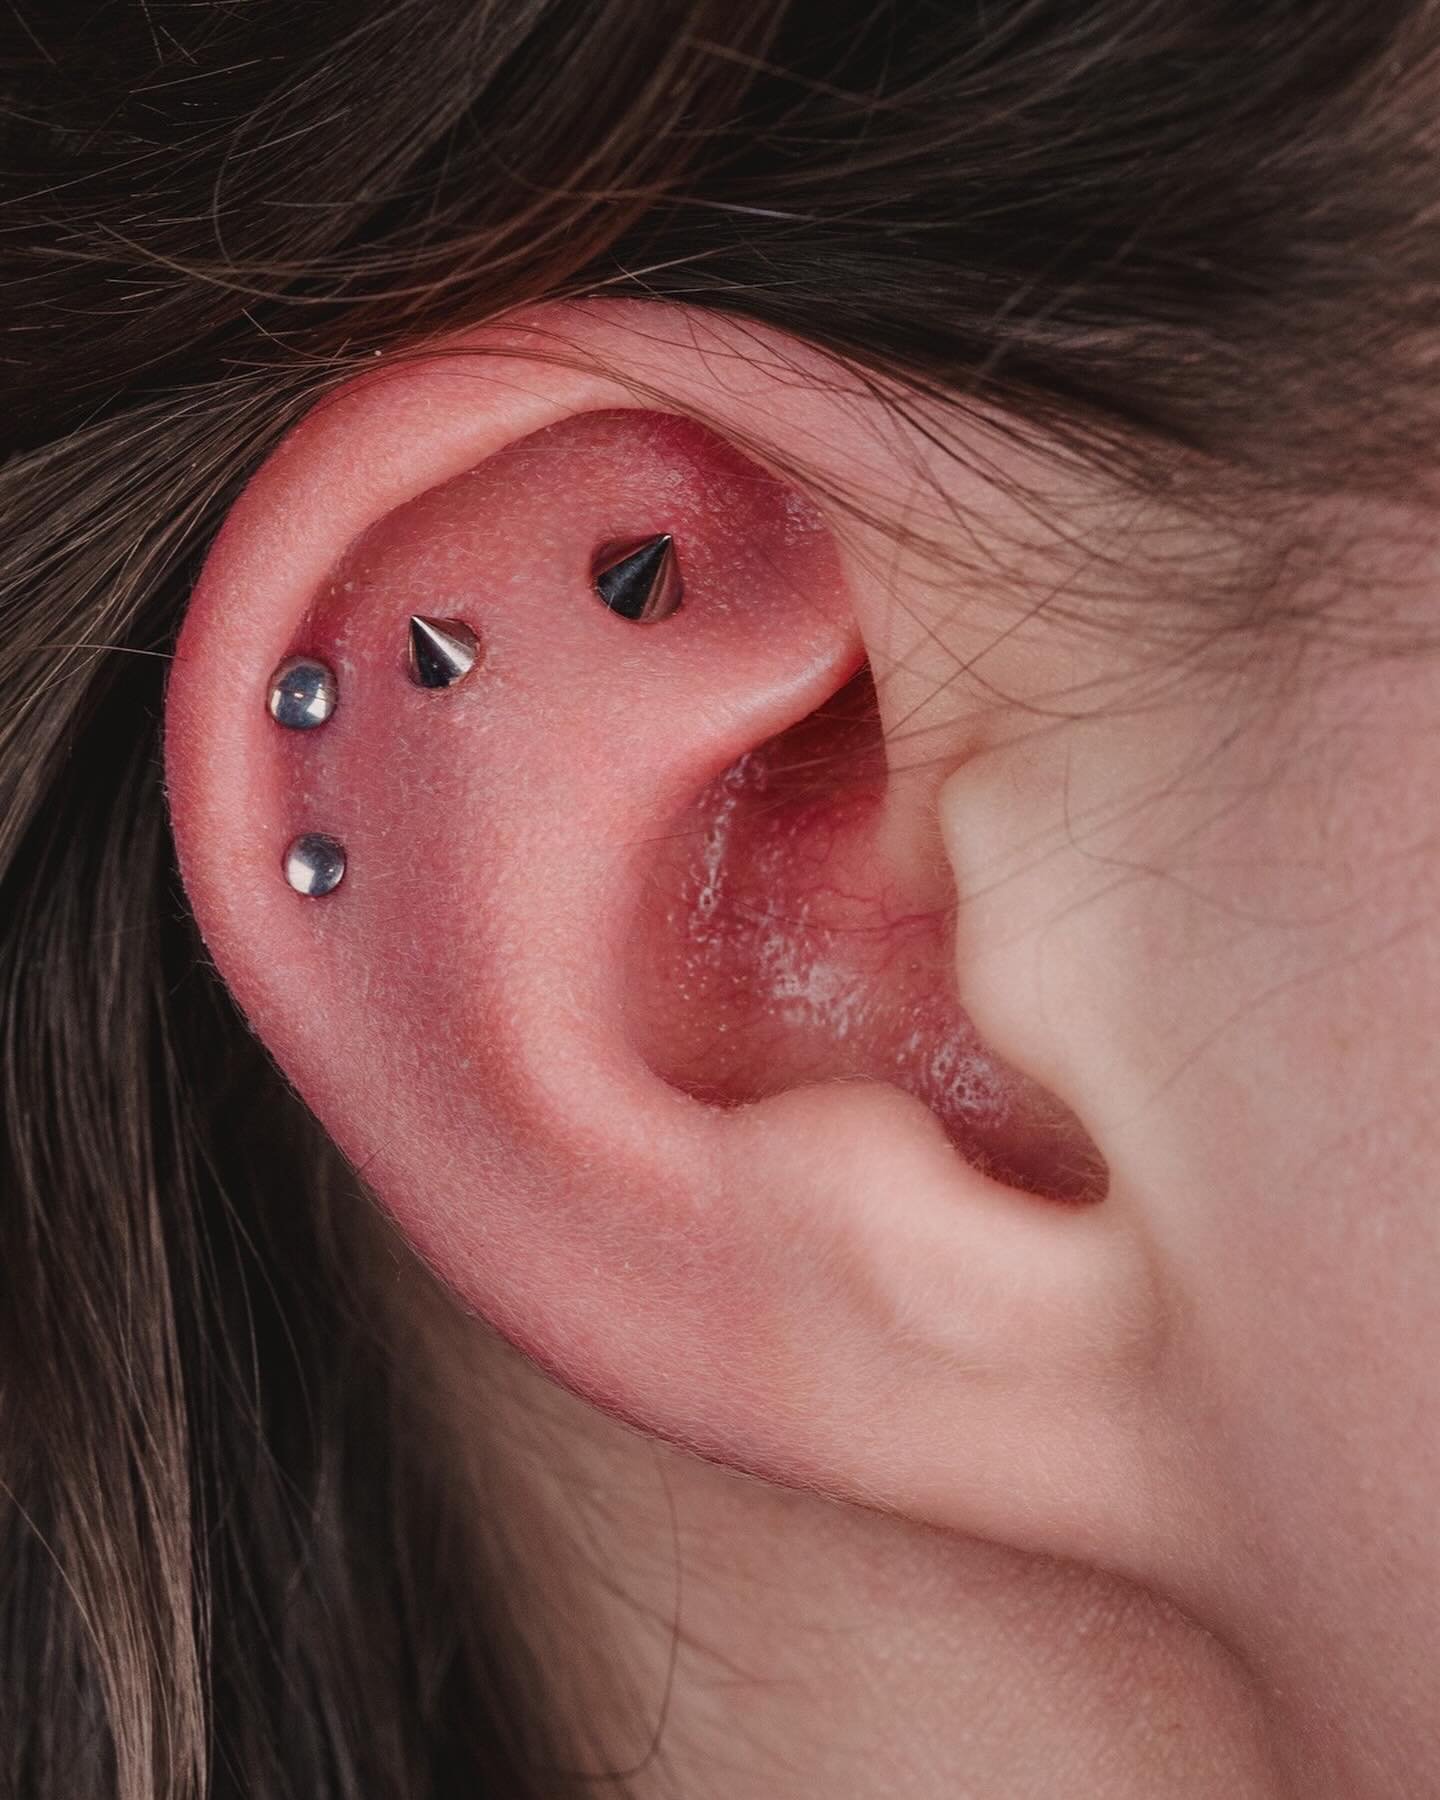 BEYOND⛓️&zwj;💥
 
YOUR REACH 
 
This titanium setup is coming along nicely for Abigail, with two fresh outer helix piercings with some classic disks and two healing flats with some threaded spikes! All performed by William⚔️
⠀⠀⠀⠀⠀⠀⠀⠀⠀
~  @passenger.p